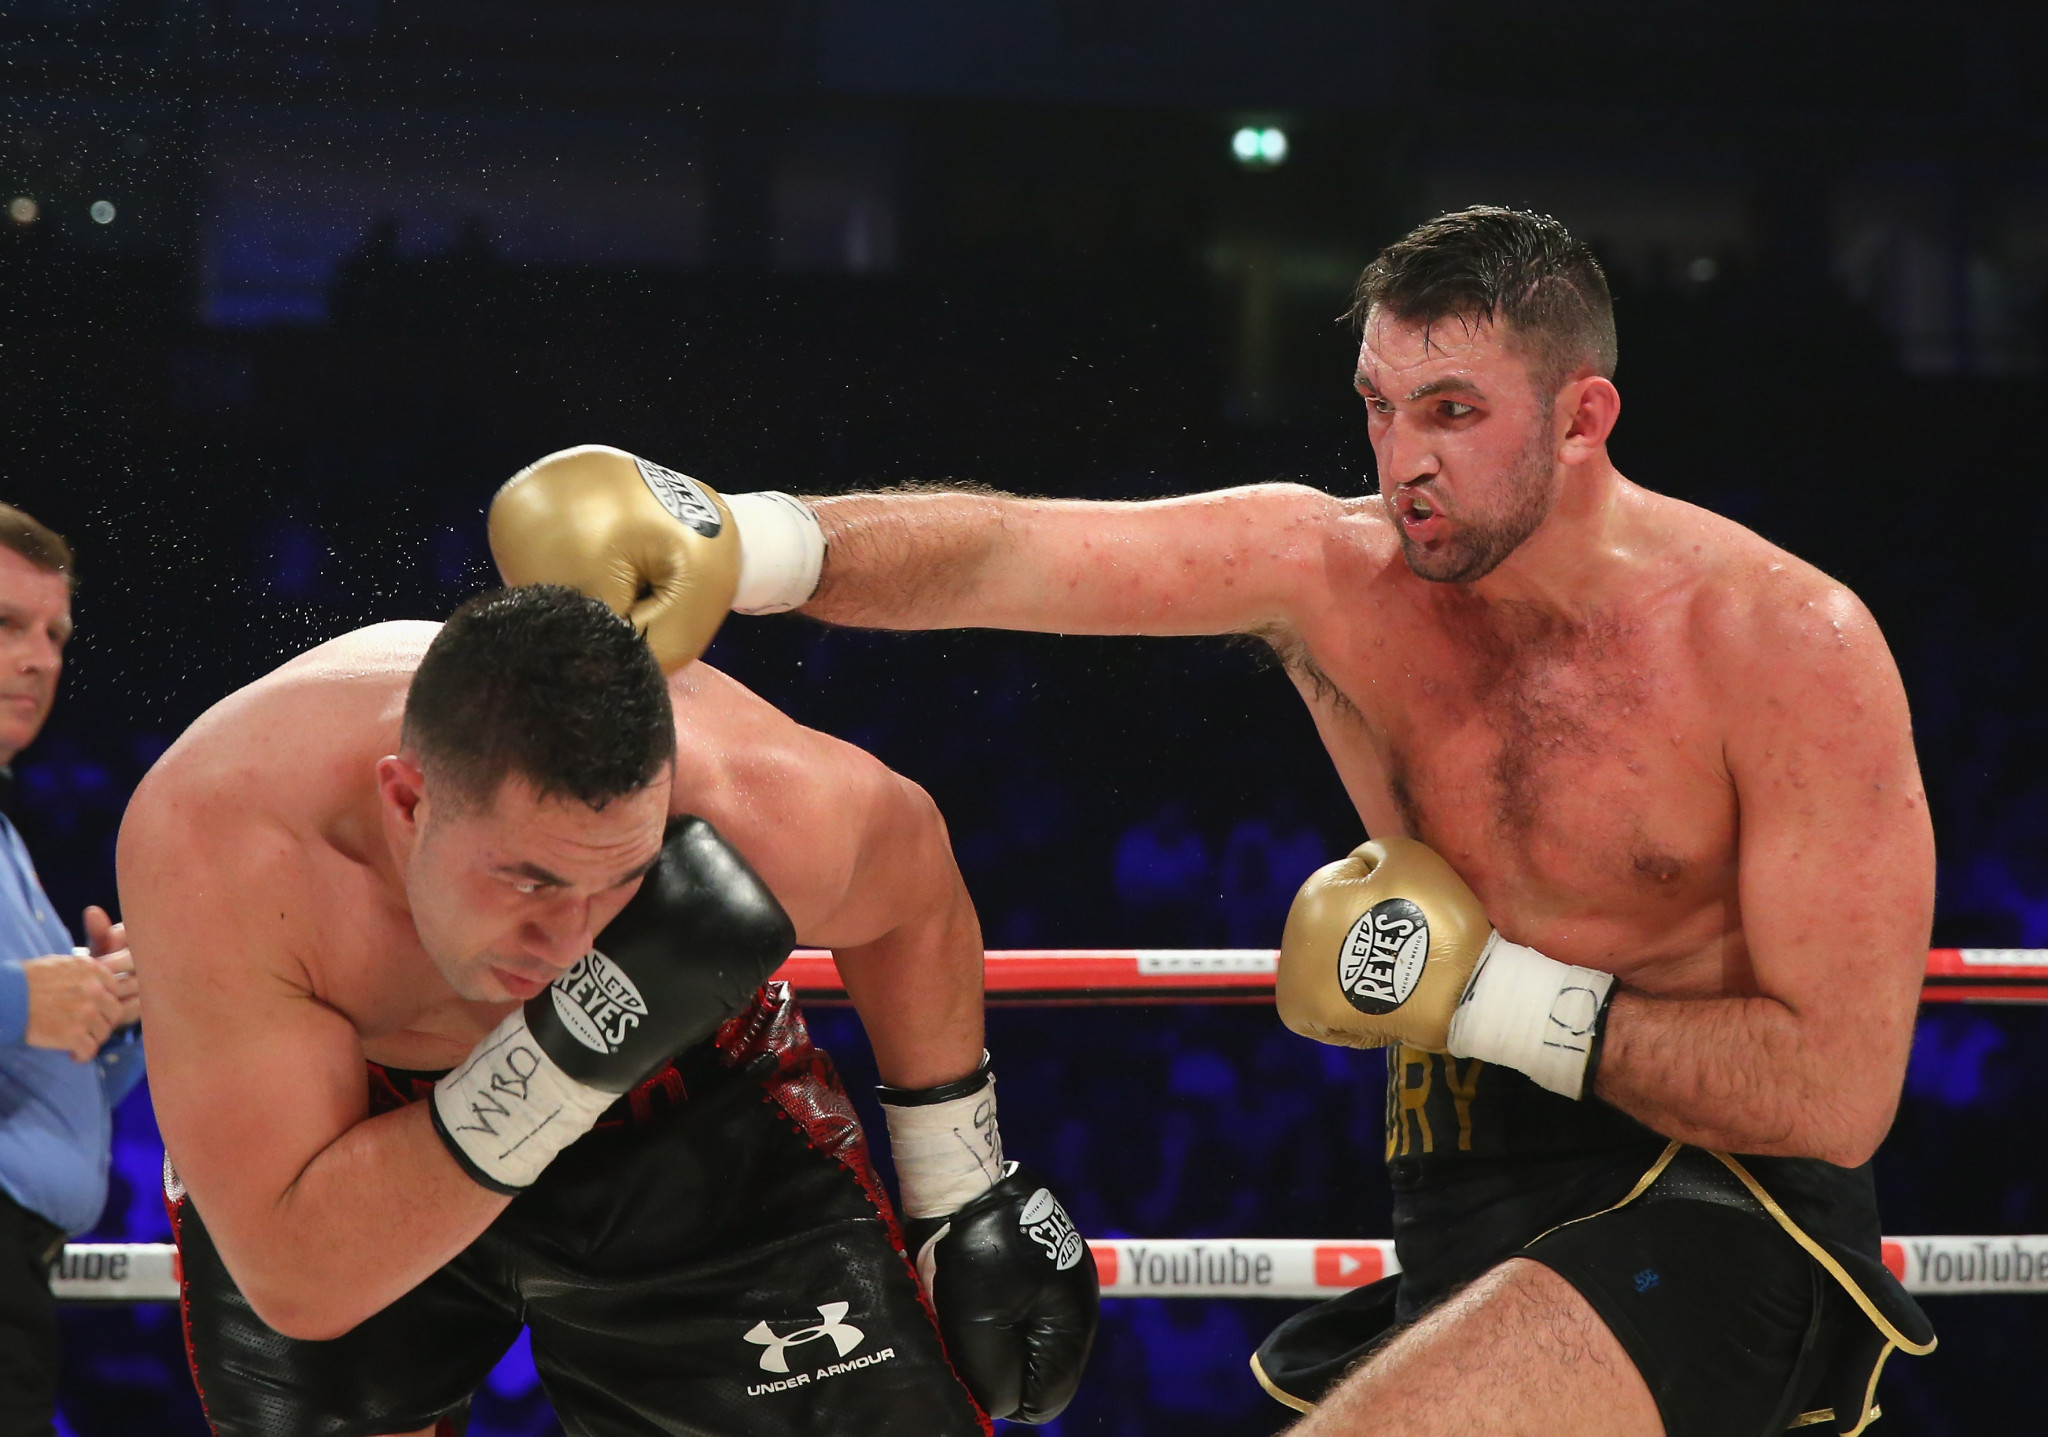 Hughie Fury lands a right shot on Joseph Parker during the WBO World Heavyweight Title fight at Manchester Arena on September 23, 2017 ©Getty Images